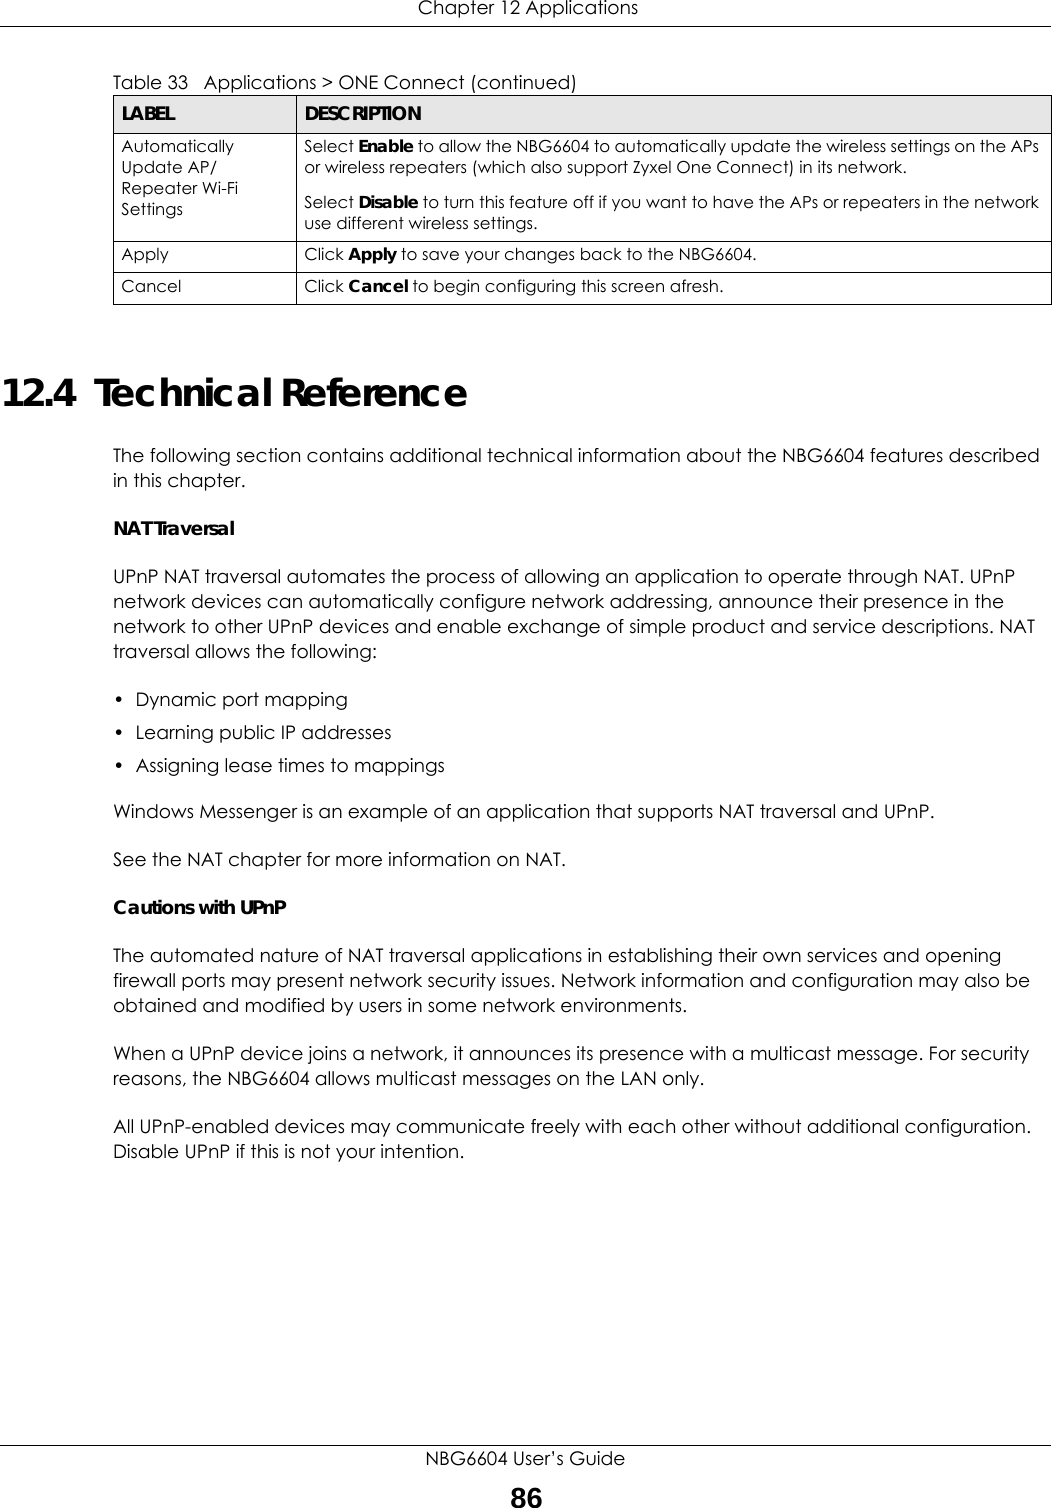  Chapter 12 ApplicationsNBG6604 User’s Guide8612.4  Technical ReferenceThe following section contains additional technical information about the NBG6604 features described in this chapter.NAT TraversalUPnP NAT traversal automates the process of allowing an application to operate through NAT. UPnP network devices can automatically configure network addressing, announce their presence in the network to other UPnP devices and enable exchange of simple product and service descriptions. NAT traversal allows the following:• Dynamic port mapping• Learning public IP addresses• Assigning lease times to mappingsWindows Messenger is an example of an application that supports NAT traversal and UPnP. See the NAT chapter for more information on NAT.Cautions with UPnPThe automated nature of NAT traversal applications in establishing their own services and opening firewall ports may present network security issues. Network information and configuration may also be obtained and modified by users in some network environments. When a UPnP device joins a network, it announces its presence with a multicast message. For security reasons, the NBG6604 allows multicast messages on the LAN only.All UPnP-enabled devices may communicate freely with each other without additional configuration. Disable UPnP if this is not your intention. Automatically Update AP/Repeater Wi-Fi SettingsSelect Enable to allow the NBG6604 to automatically update the wireless settings on the APs or wireless repeaters (which also support Zyxel One Connect) in its network. Select Disable to turn this feature off if you want to have the APs or repeaters in the network use different wireless settings.Apply Click Apply to save your changes back to the NBG6604.Cancel Click Cancel to begin configuring this screen afresh.Table 33   Applications &gt; ONE Connect (continued)LABEL DESCRIPTION